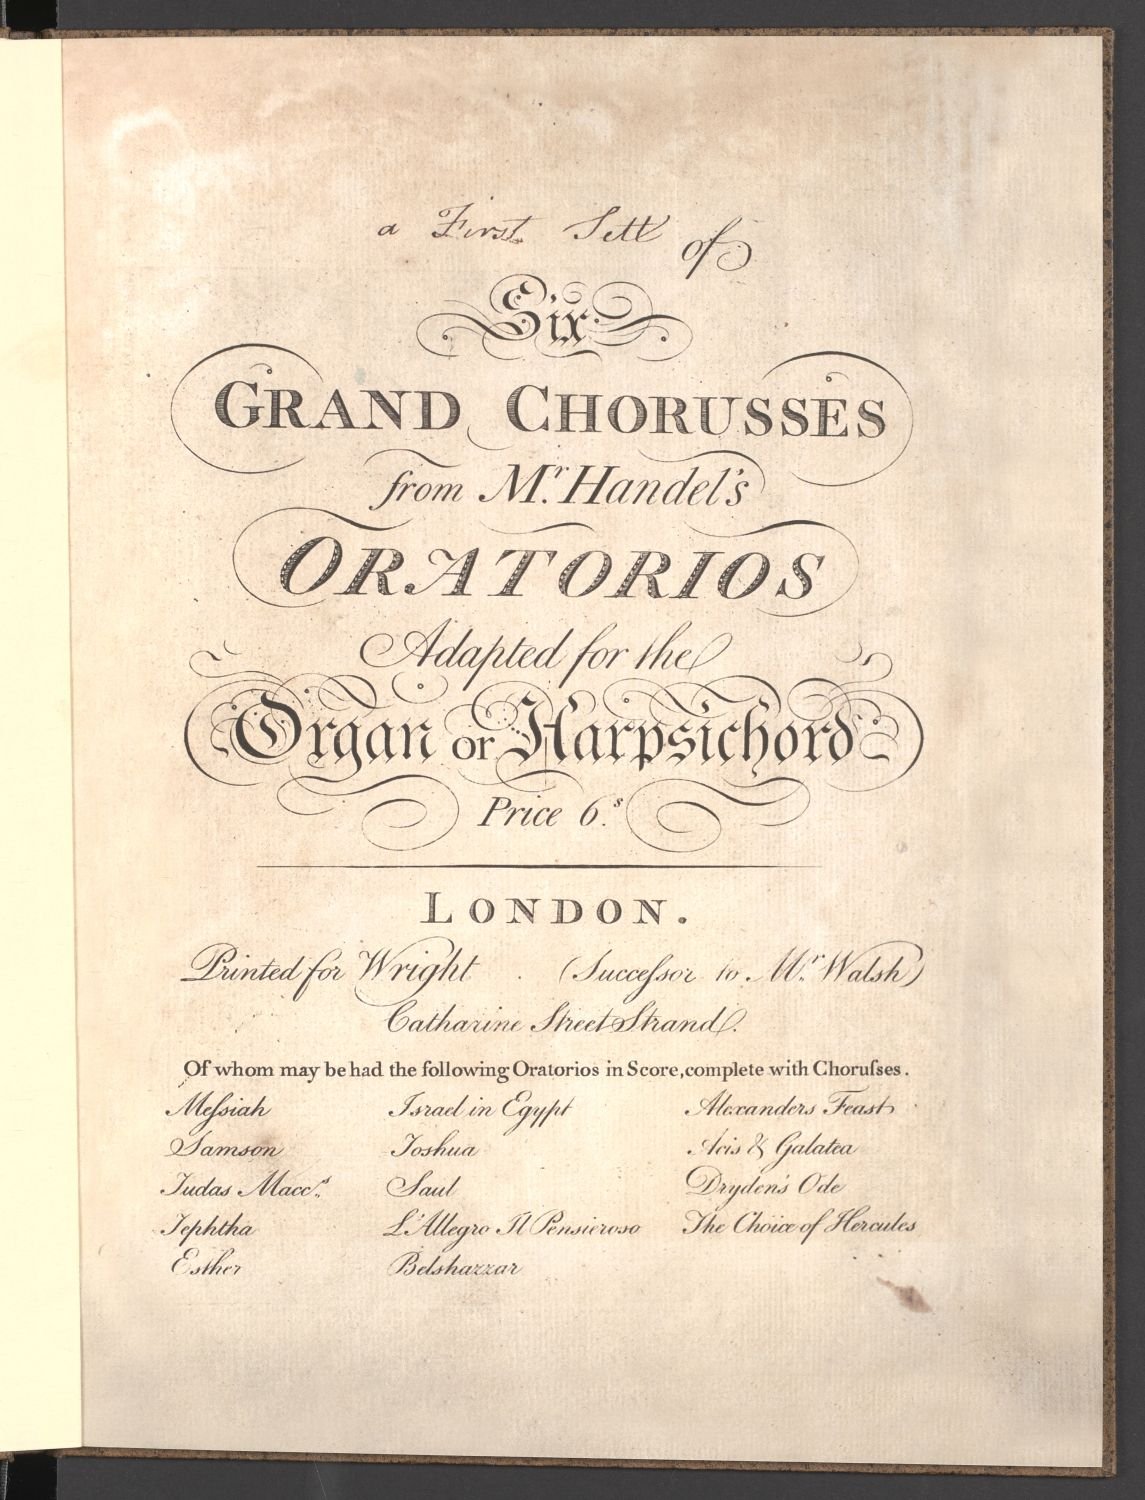 Six grand chorusses from Mr. Handel's oratorios adapted for the organ or harpsichord (Stiftung Händel-Haus CC BY-NC-SA)